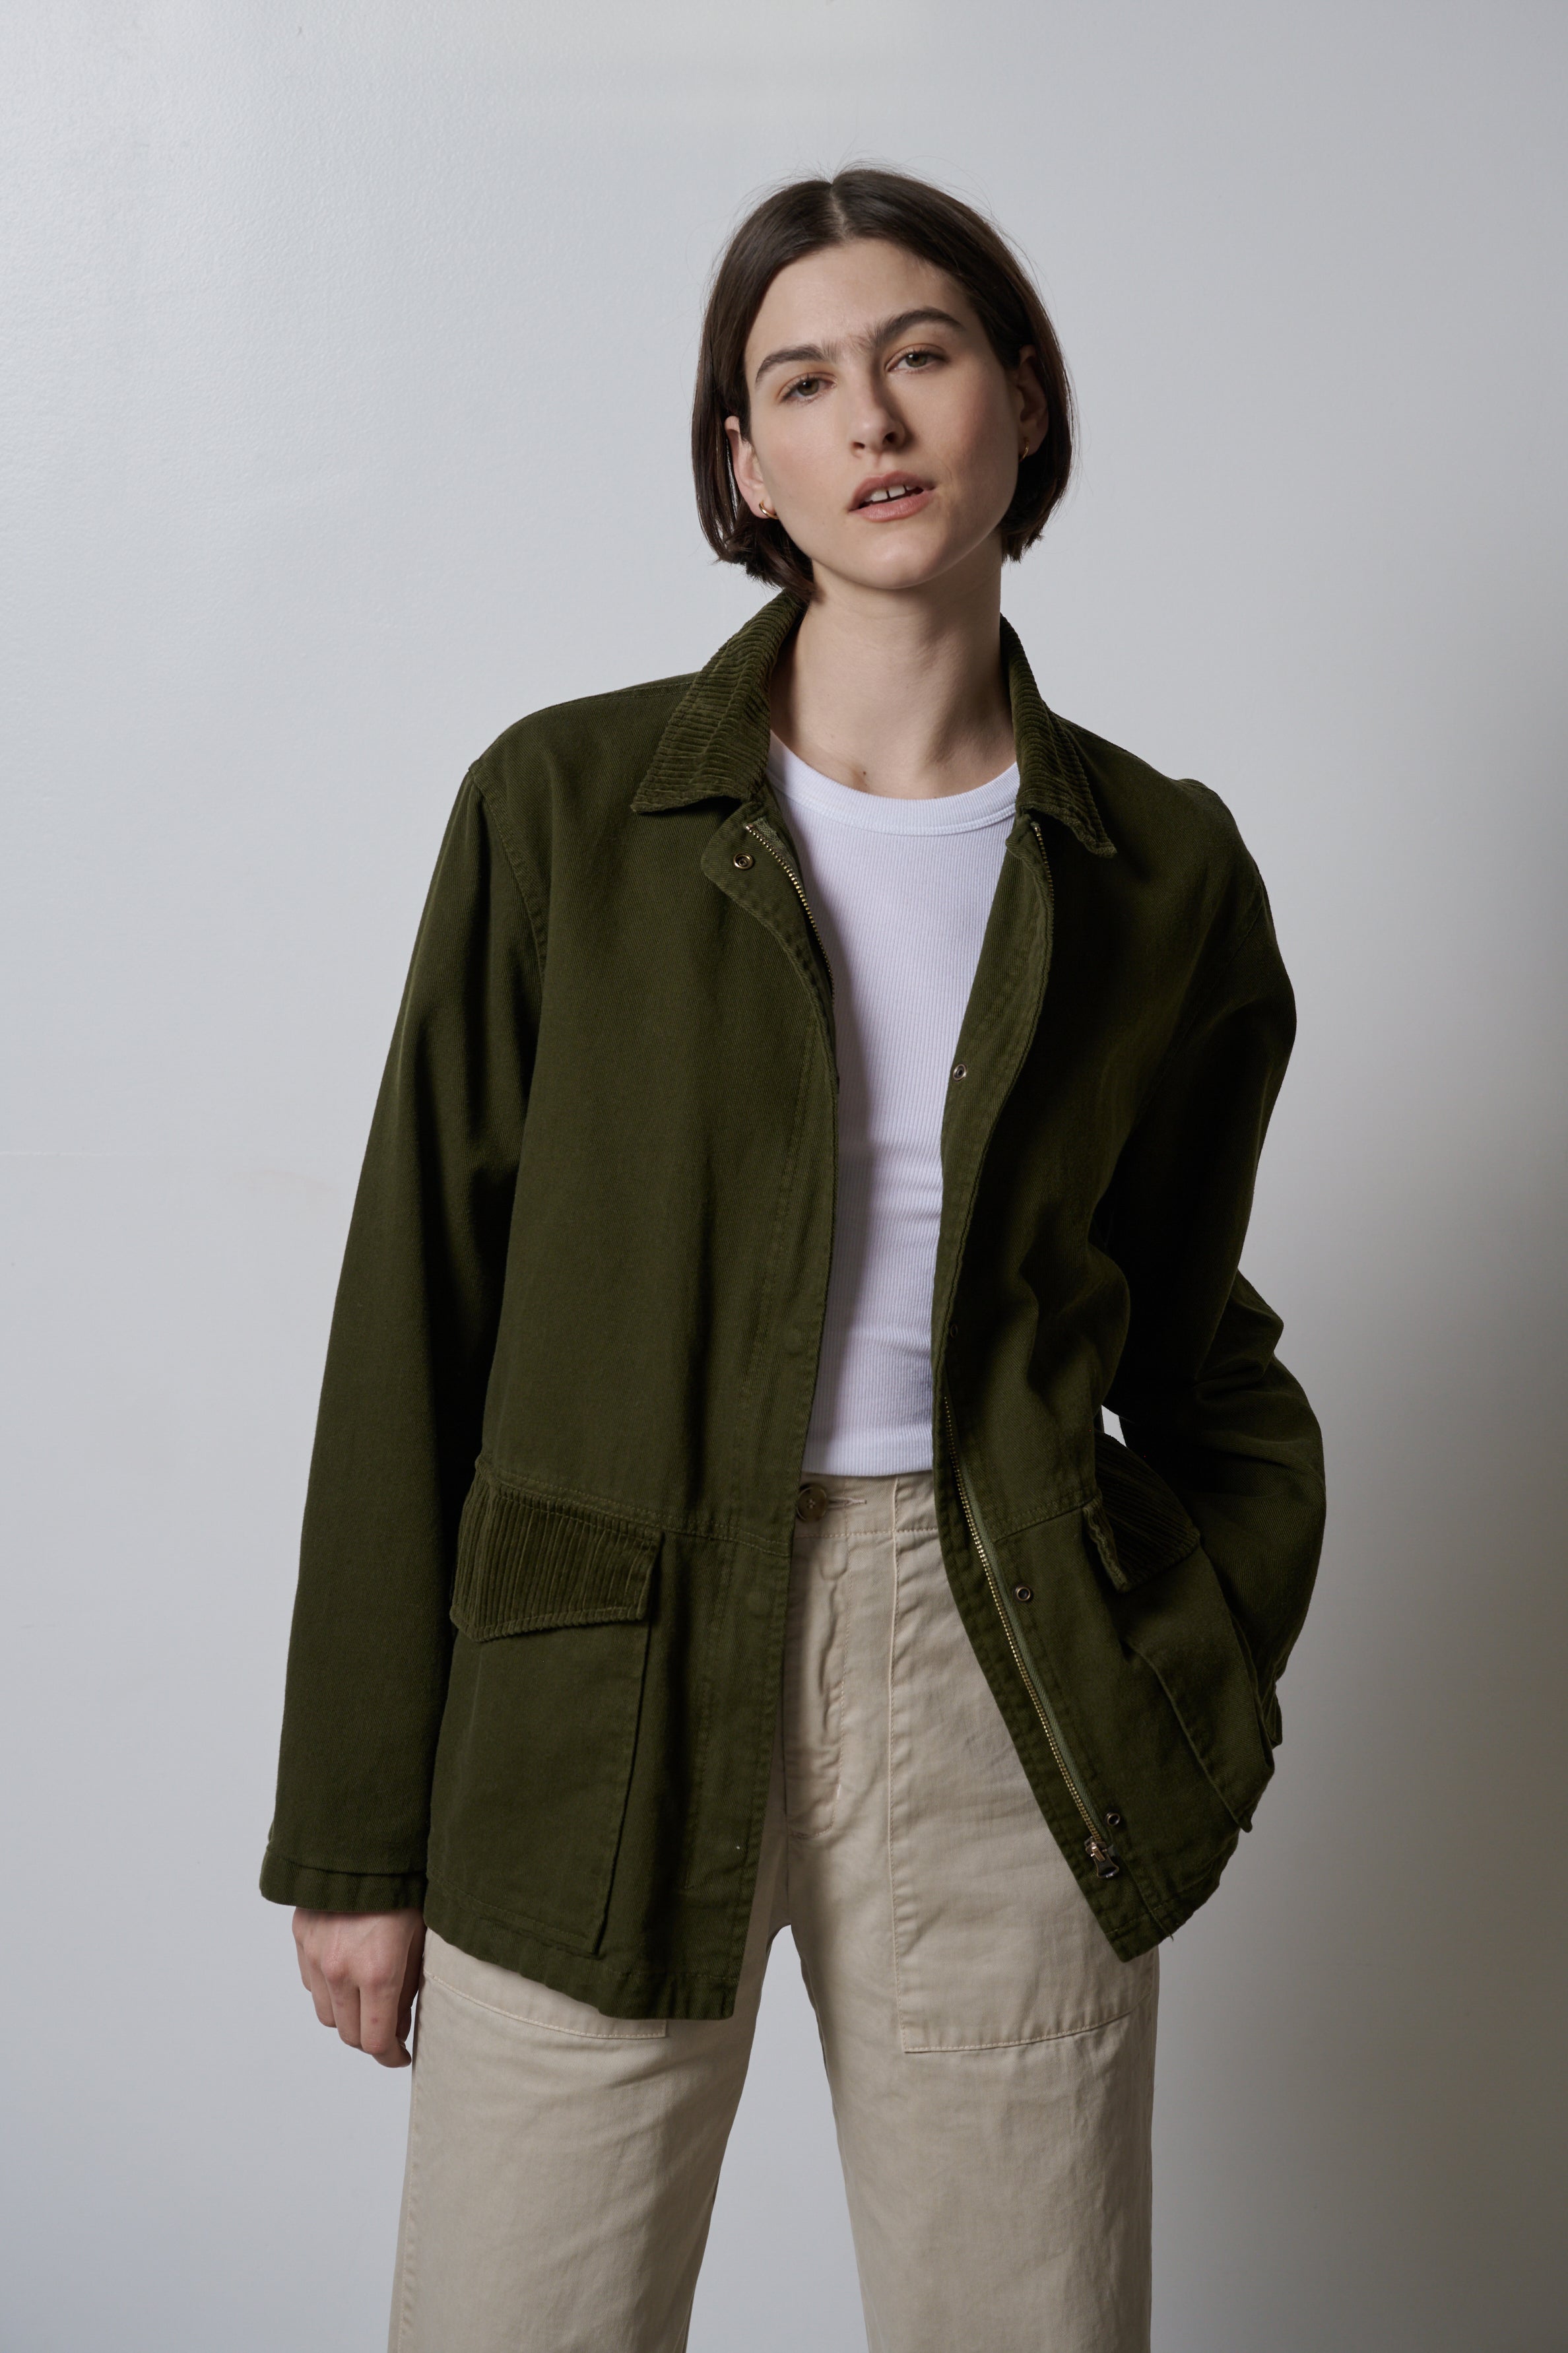   A model wearing a Velvet by Jenny Graham green OAKLEY JACKET and khaki pants made from cotton twill fabric. 